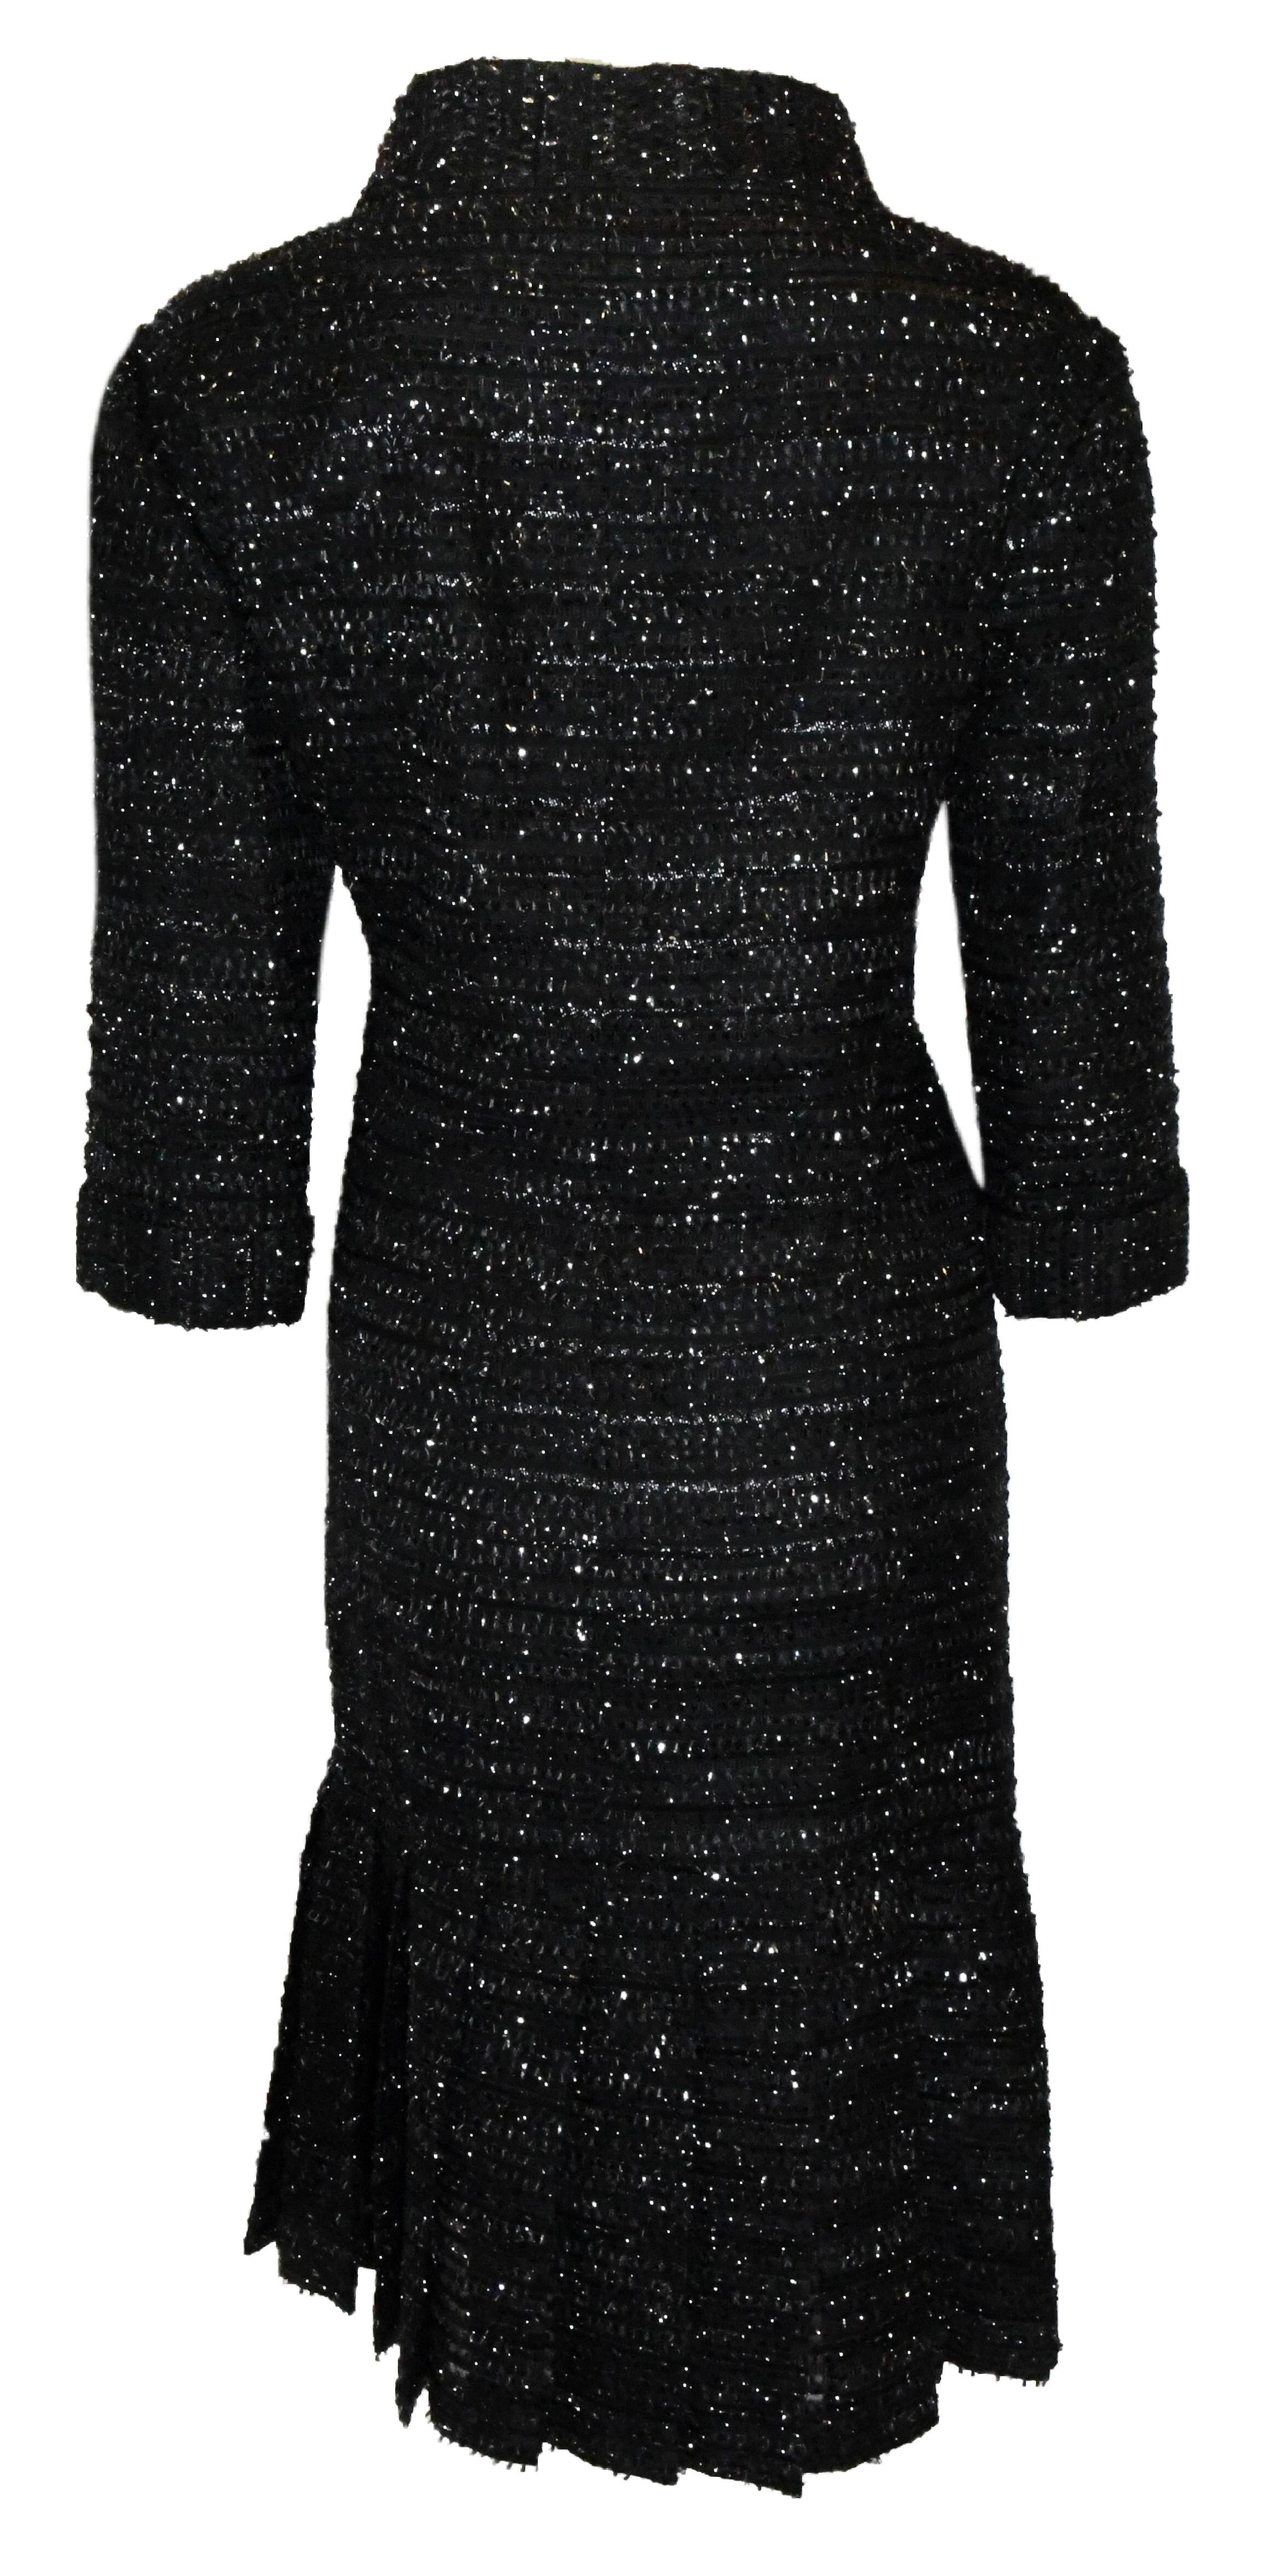 Chanel Black  & Silver Lurex Thread Dress With 3/4 Sleeves Pleated at Hem In Excellent Condition For Sale In Palm Beach, FL